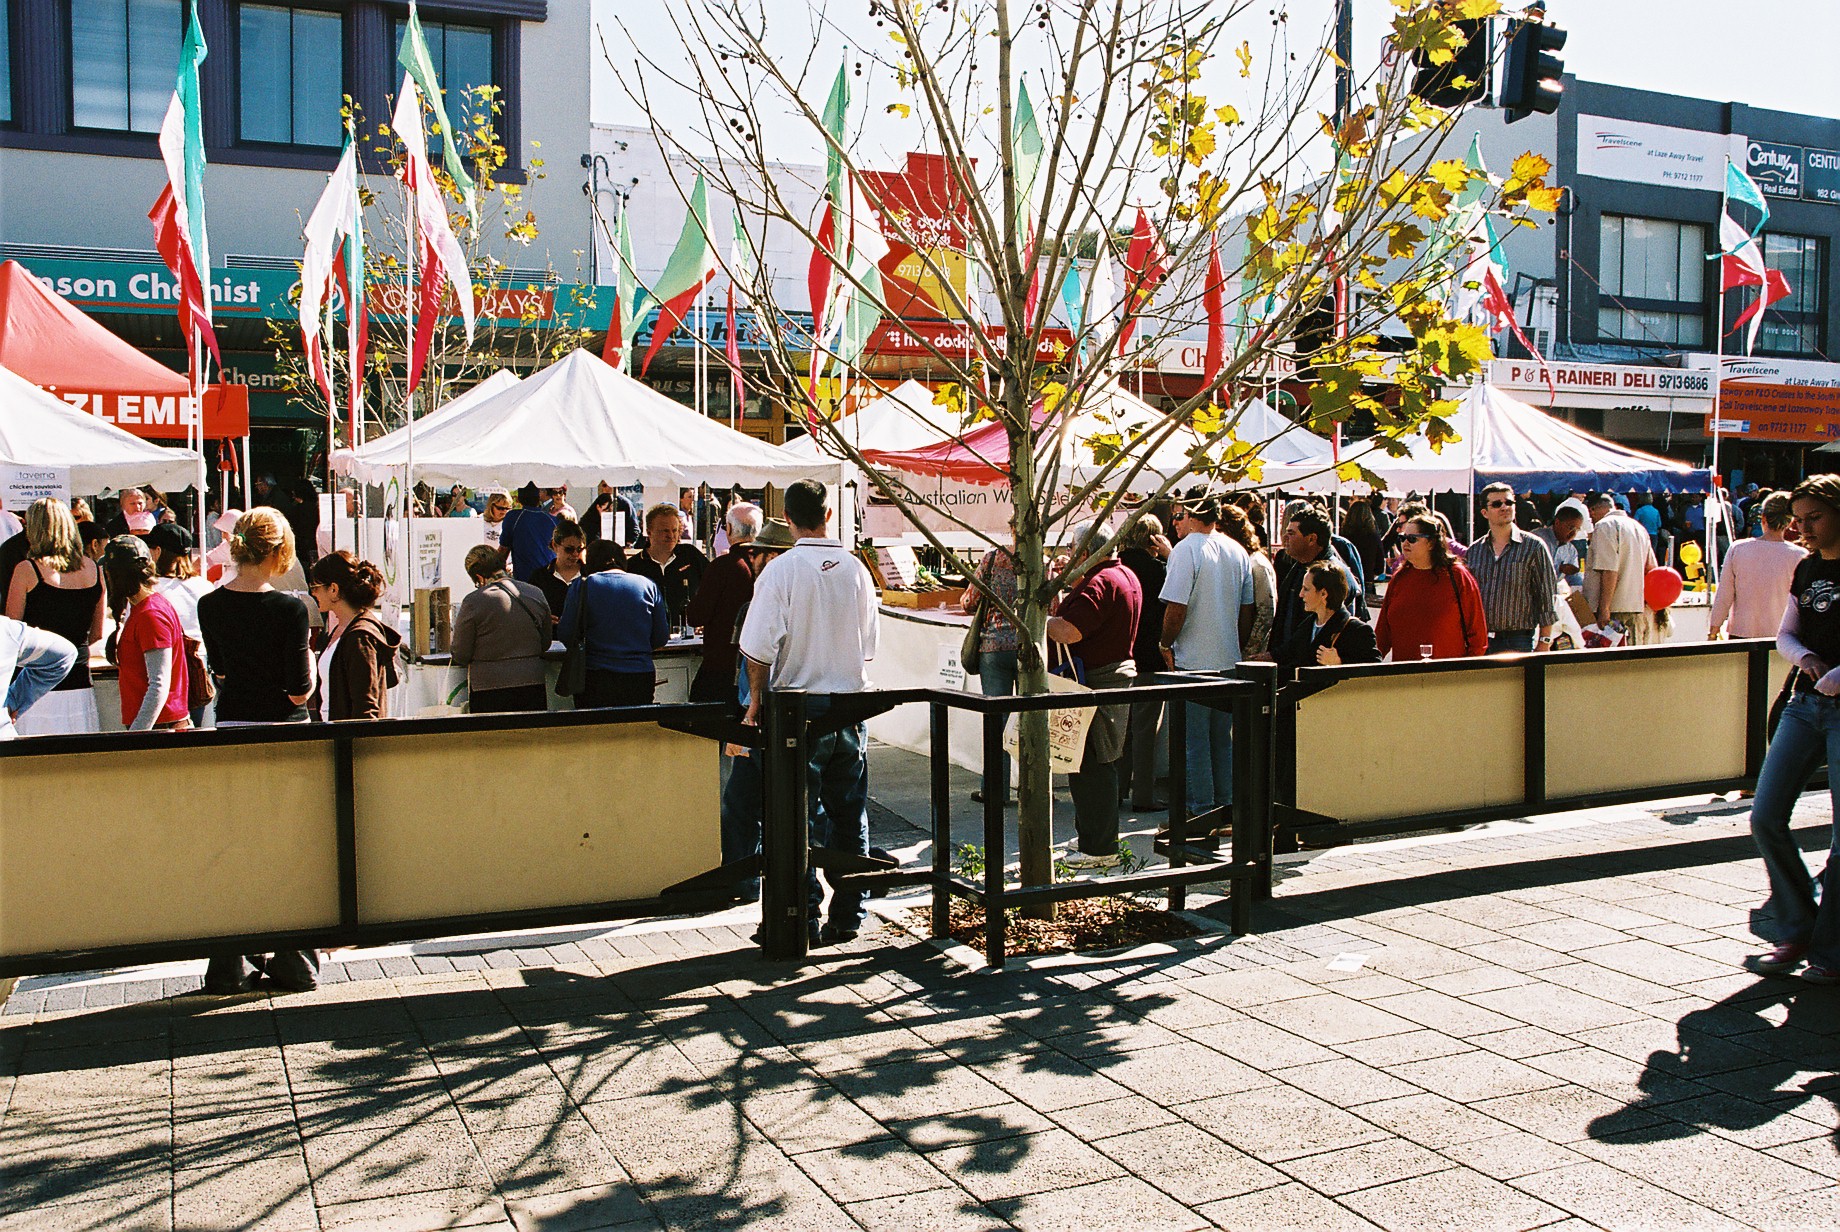 crowd of people in front of white stall